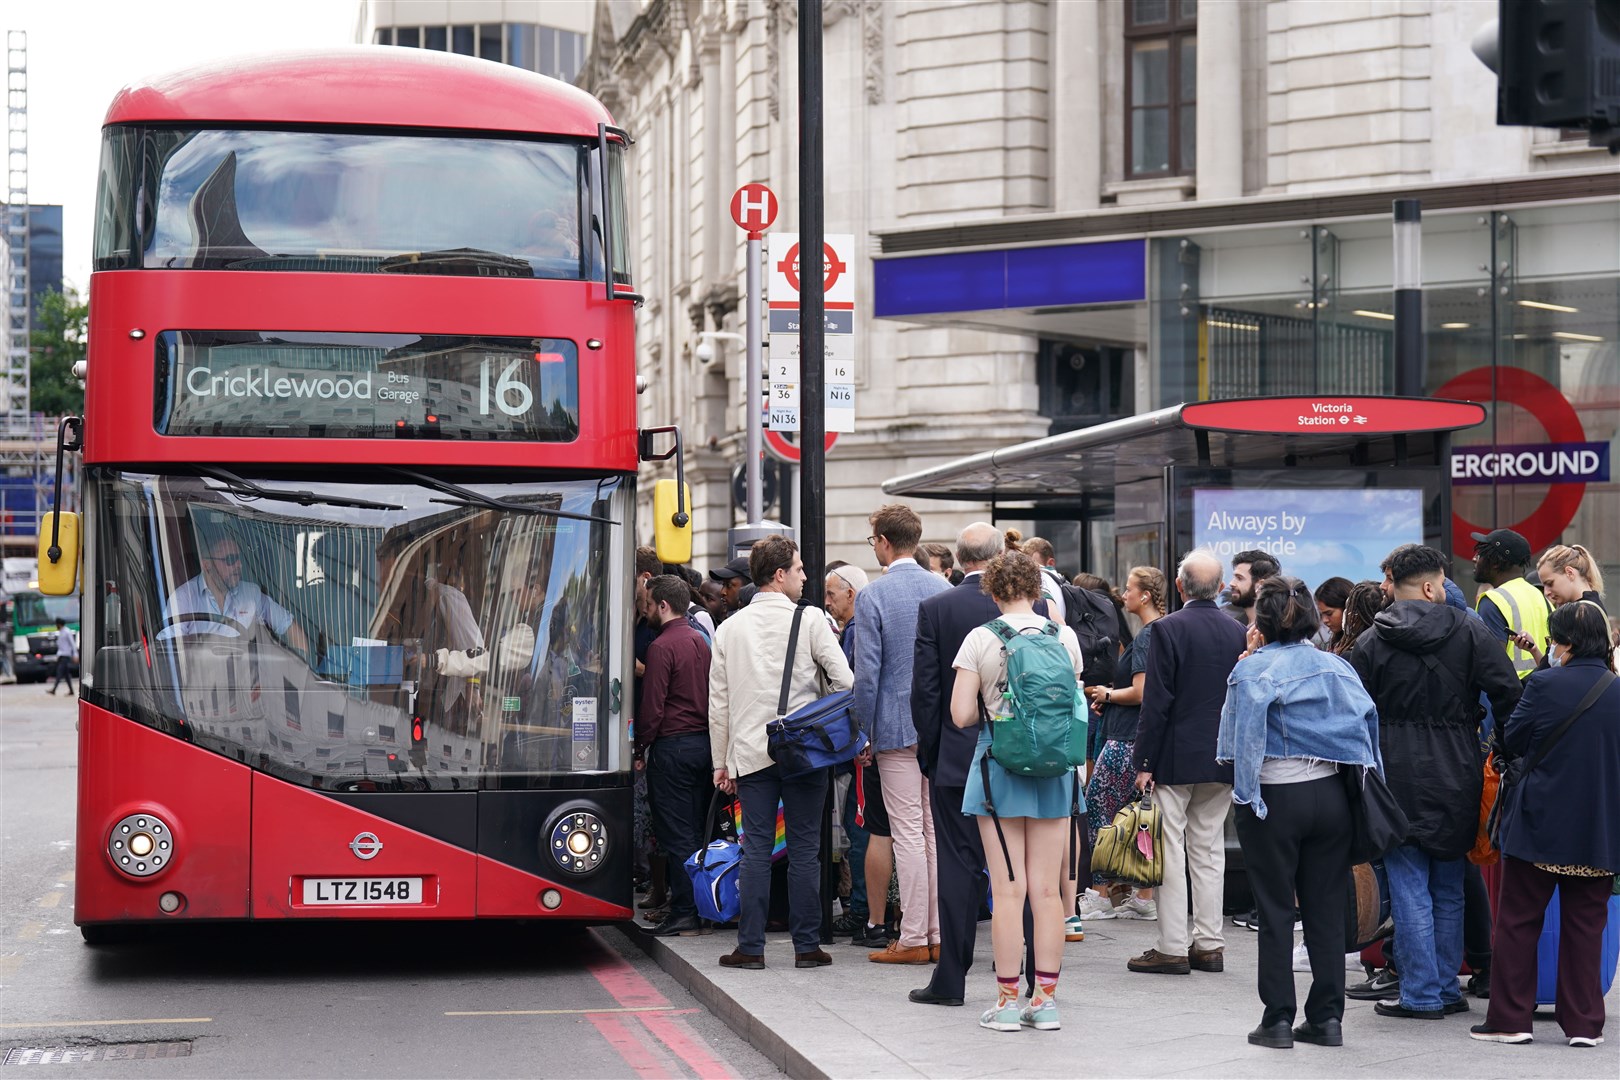 TfL says all revenue is reinvested into running and improving London’s transport network (PA)